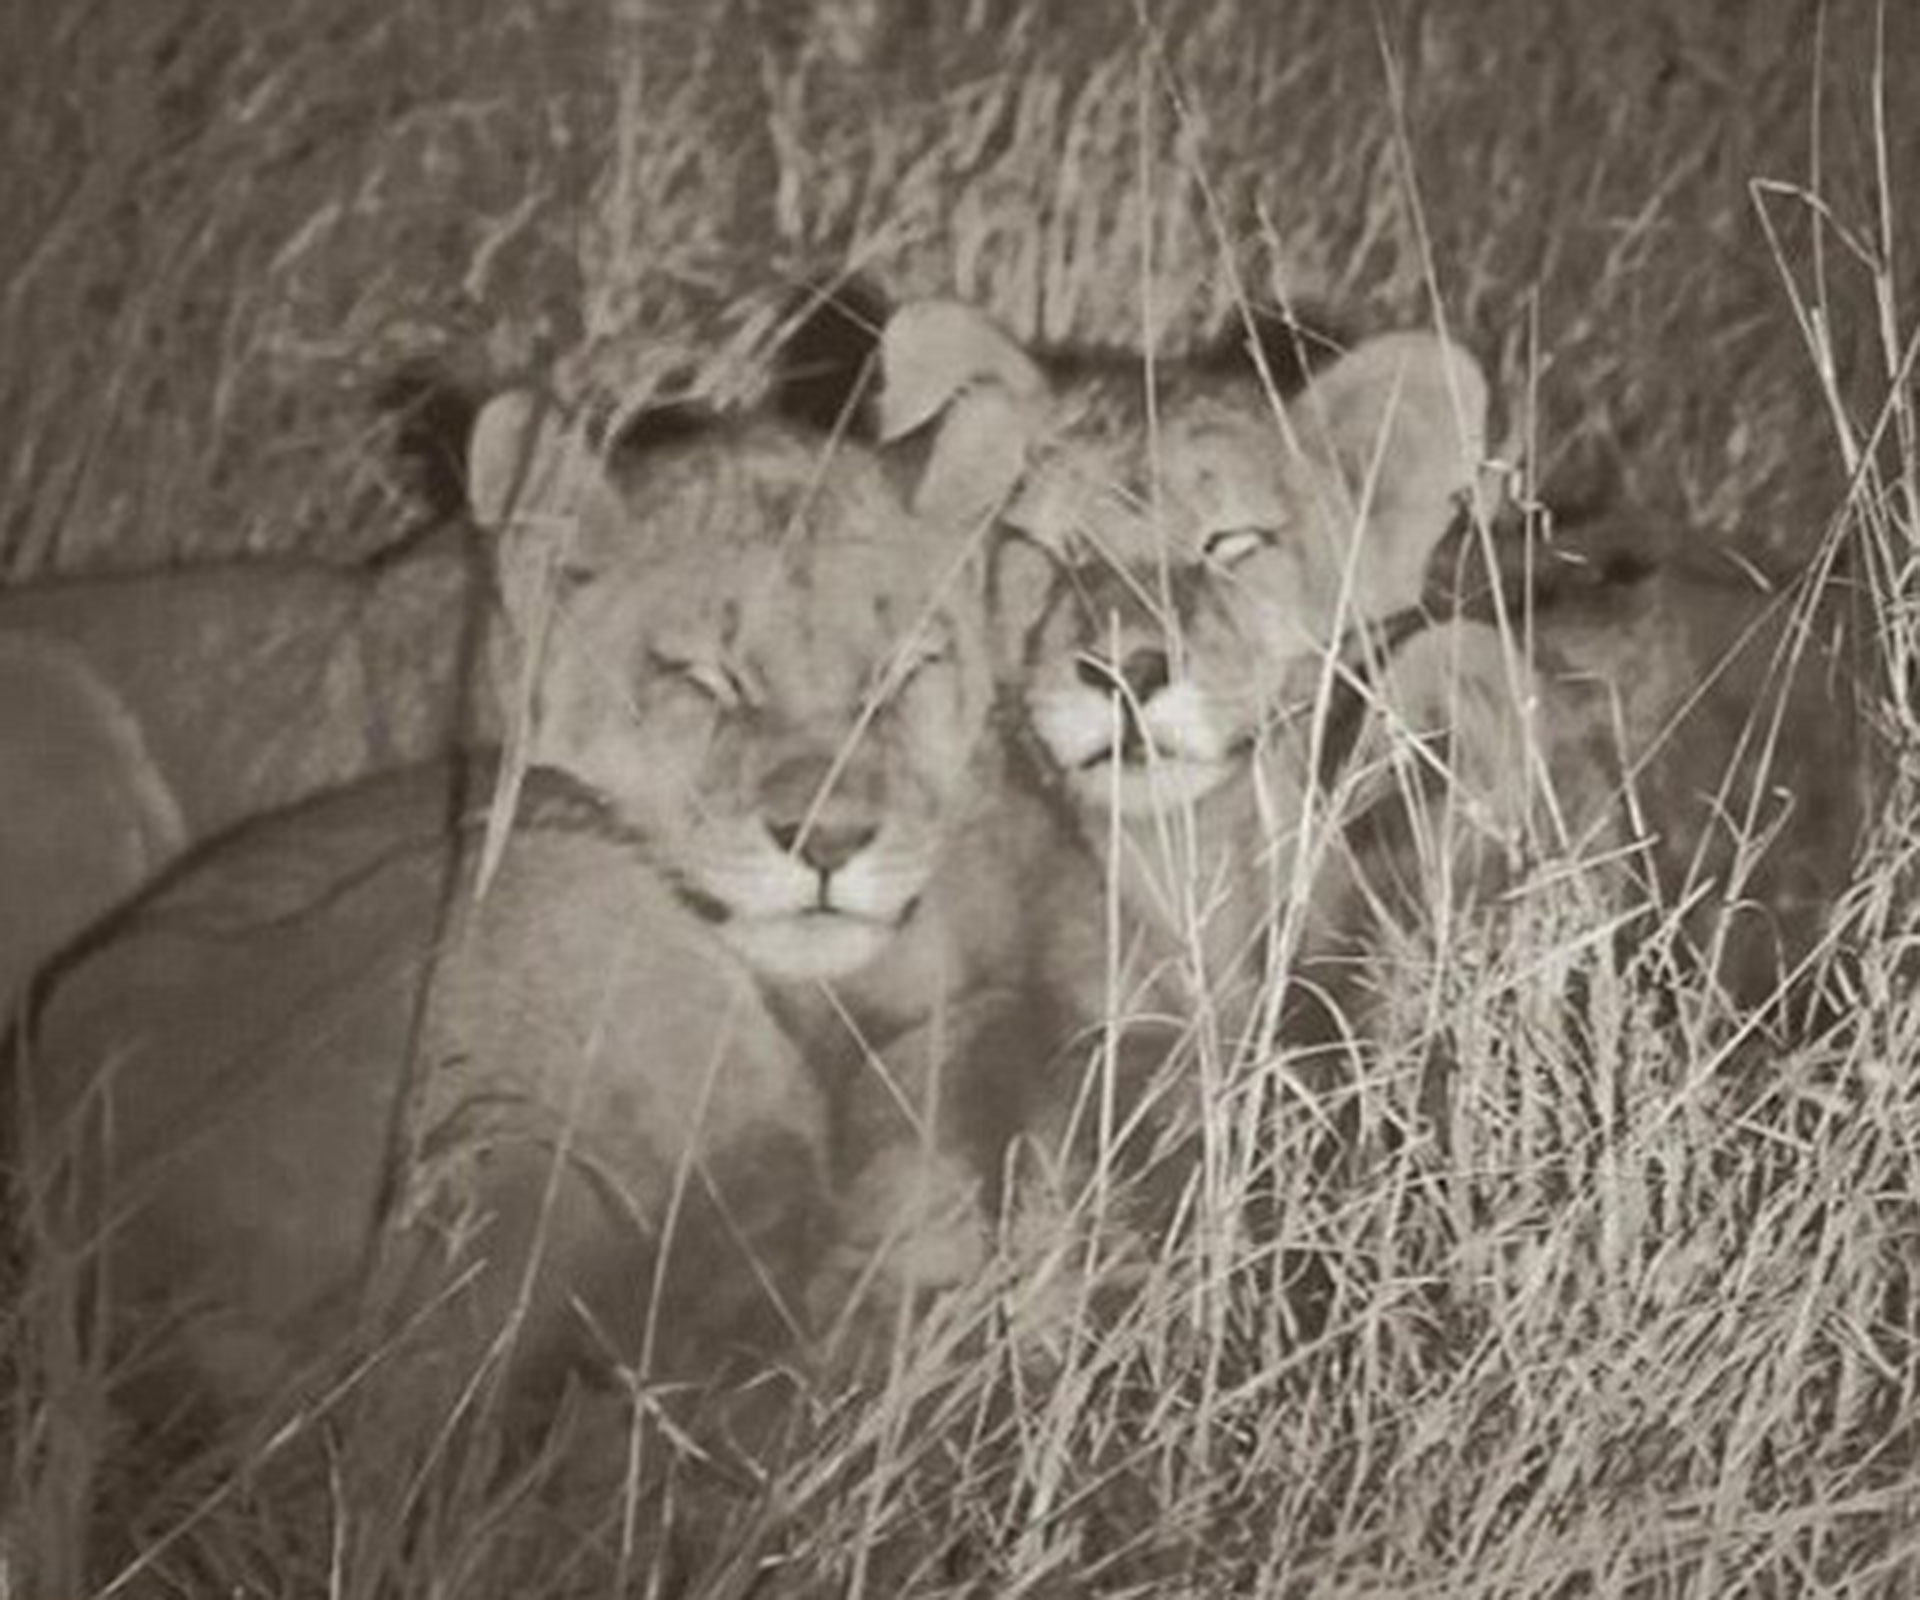 Cecil the Lion’s cubs adopted